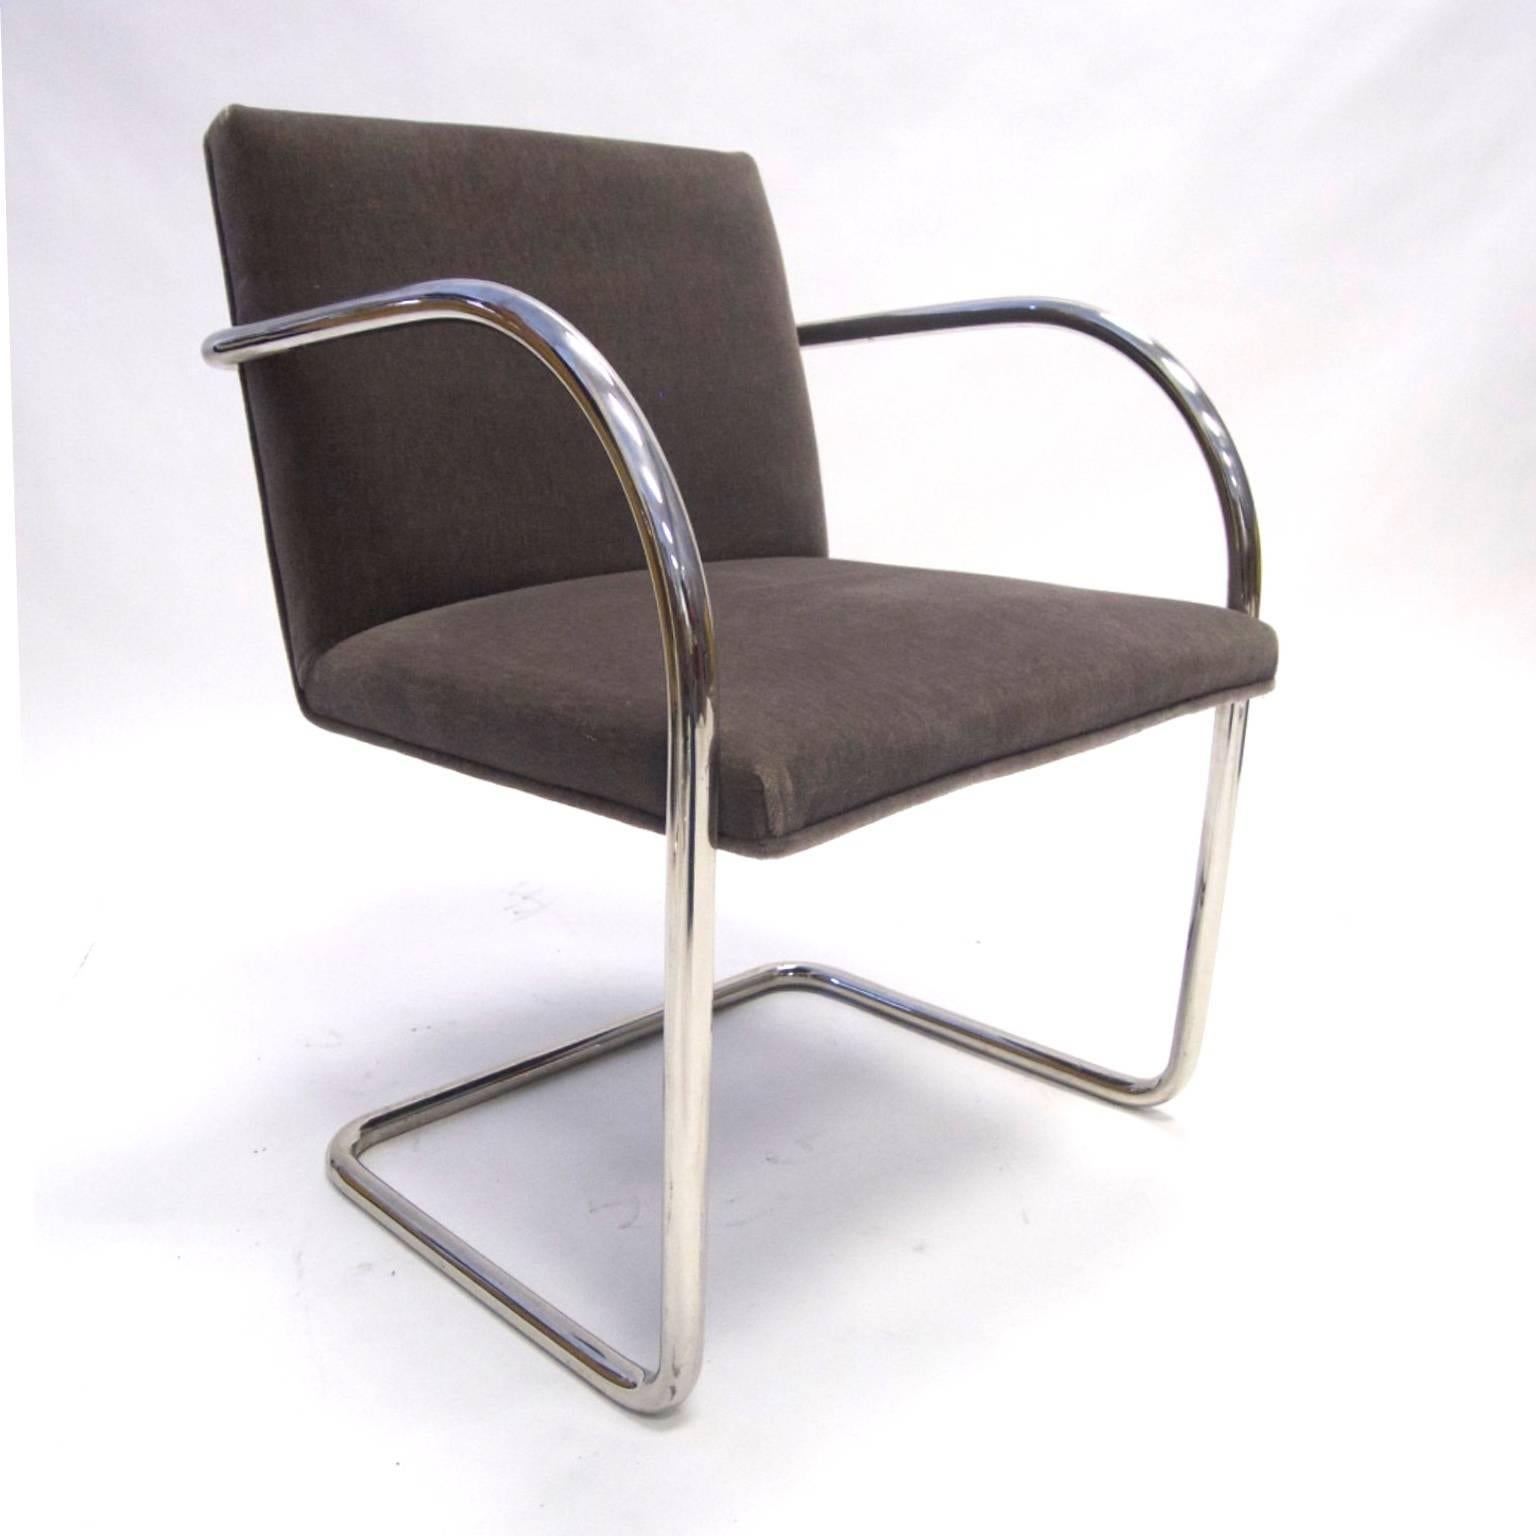 A single Mies van der Rohe Brno chair in a Mohair type fabric with stainless steel frame.